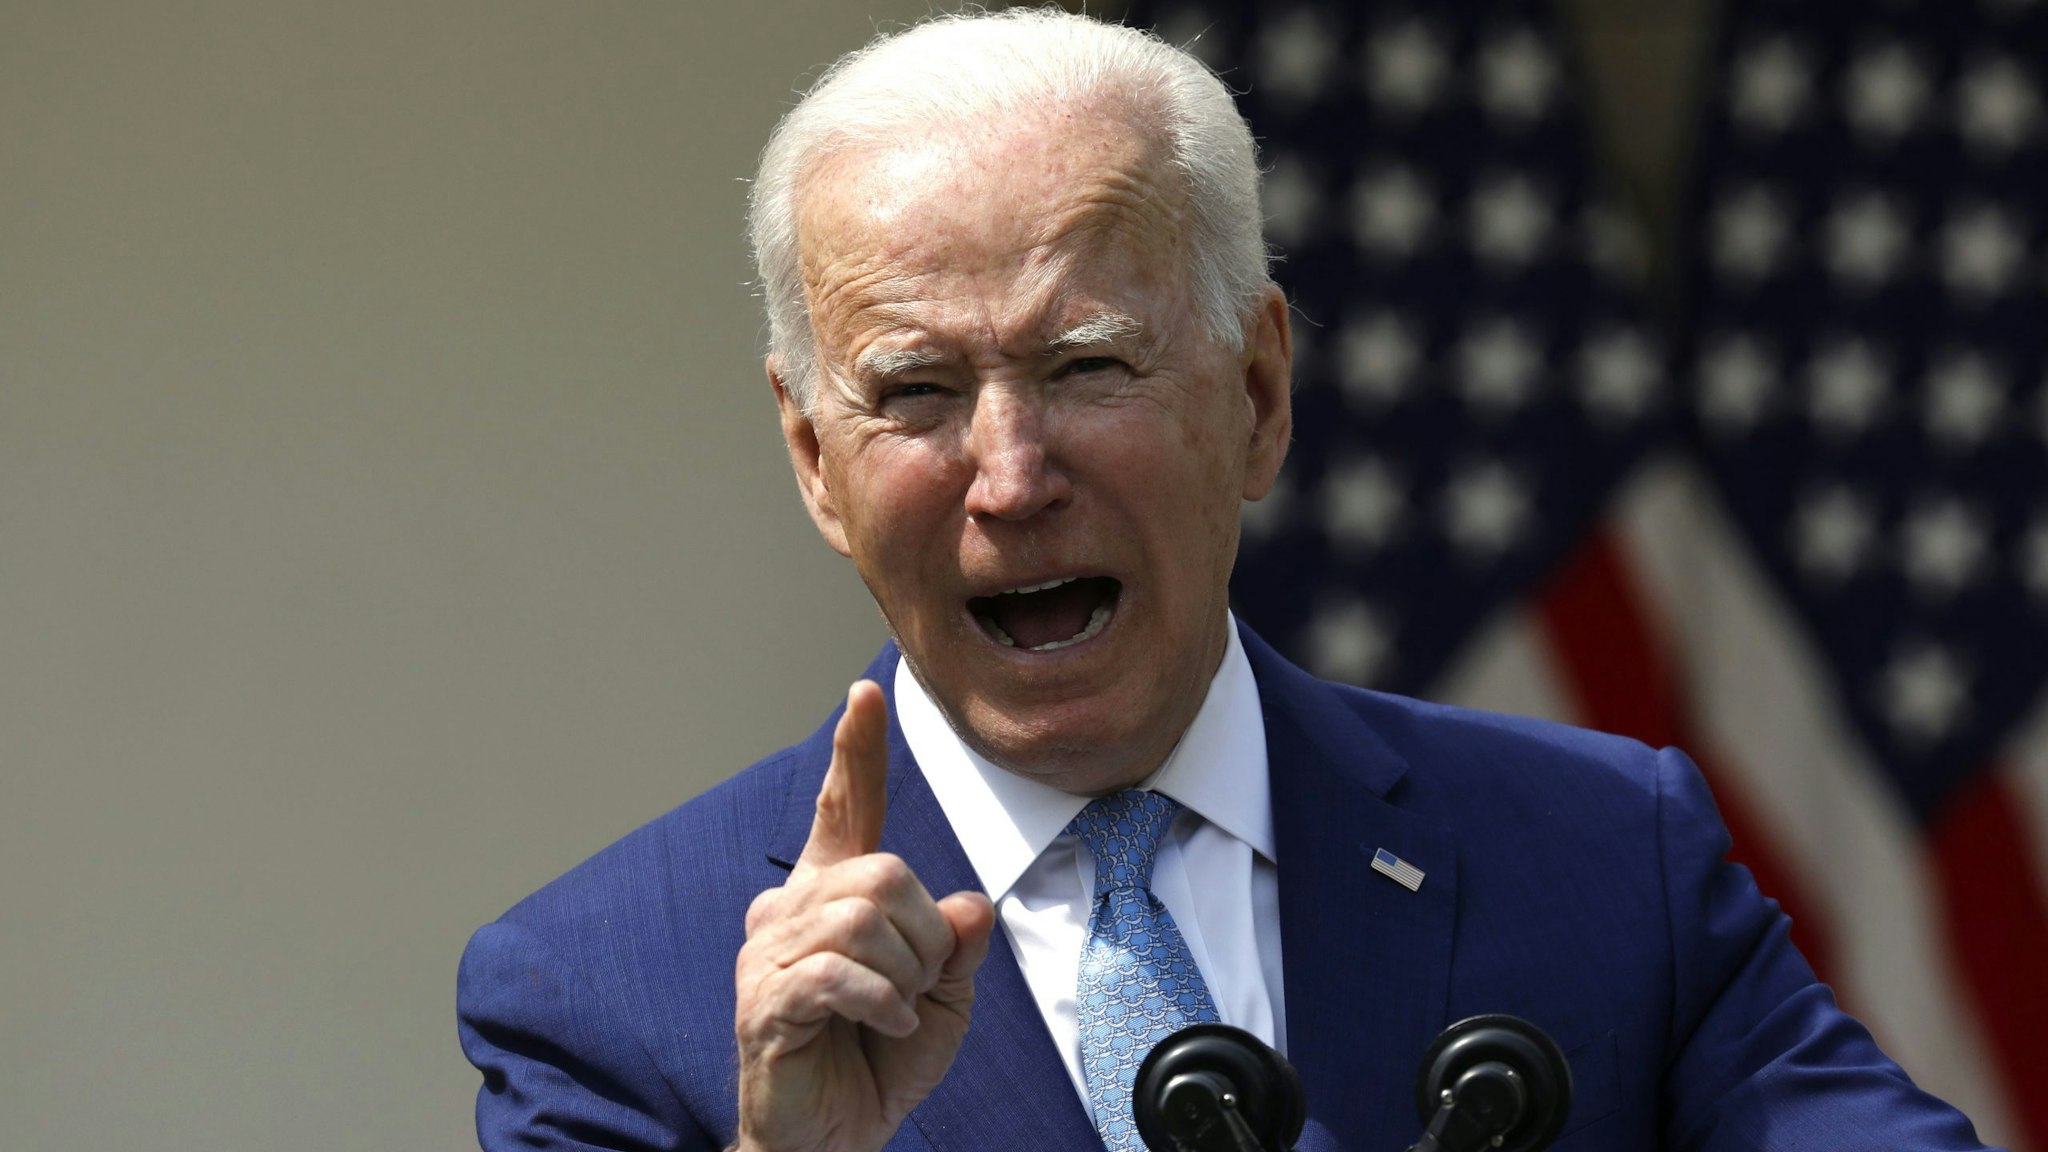 U.S. President Joe Biden speaks in the Rose Garden of the White House in Washington, D.C., U.S., on Thursday, April 8, 2021. Biden announced a set of executive actions to curb gun violence, urging Congress to adopt stricter laws and rebutting arguments that his new measures impinge on Americans' second amendment rights.